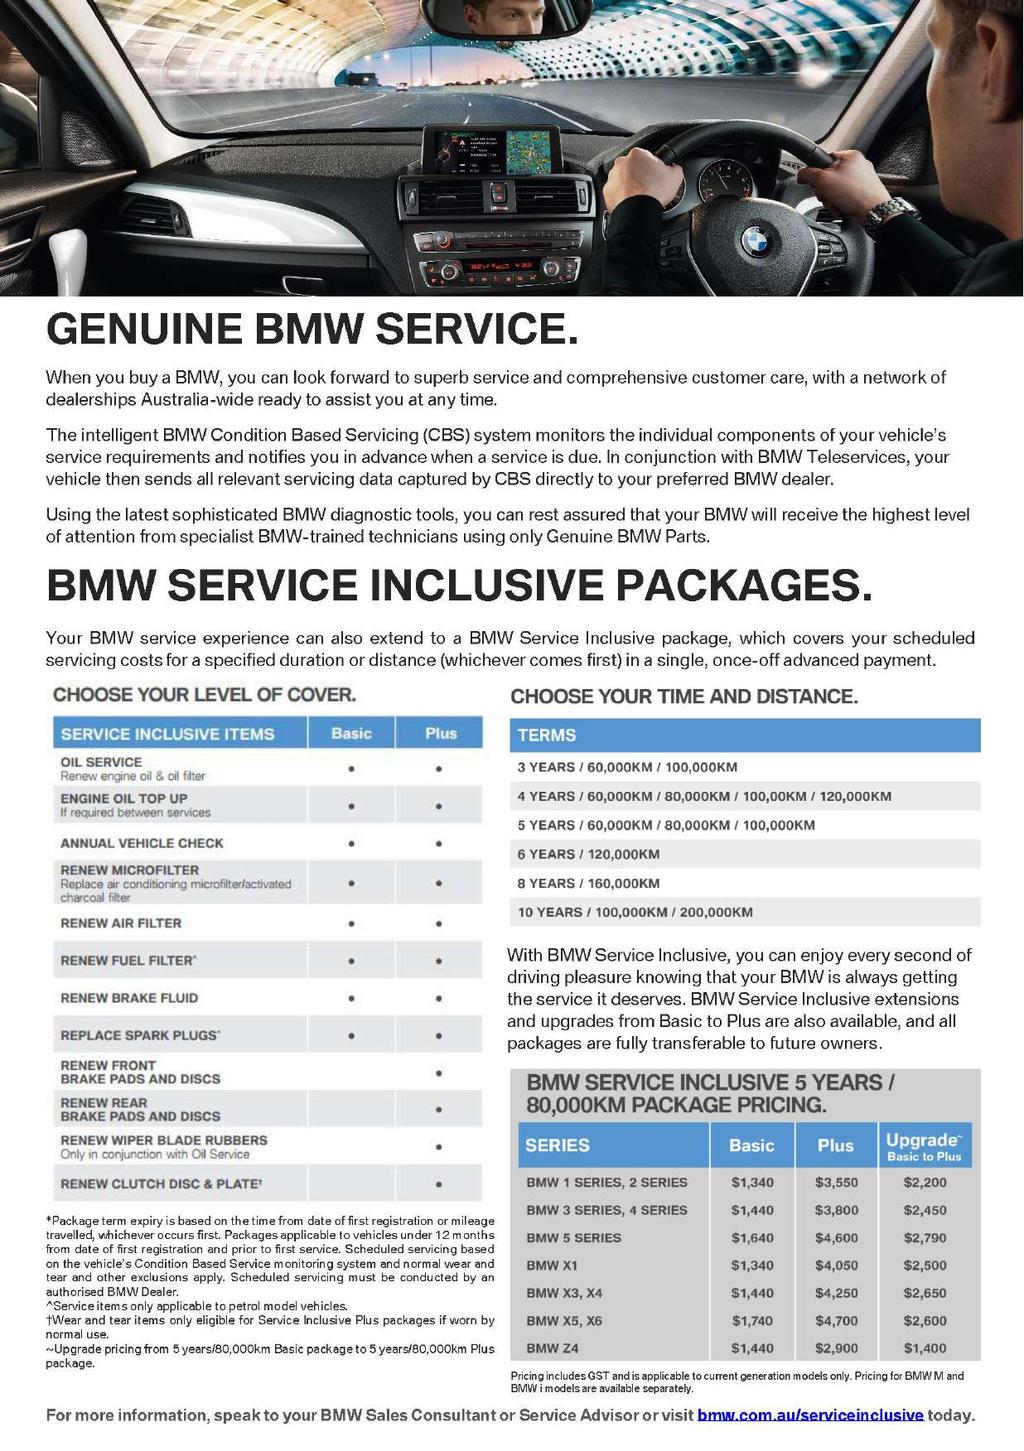 For more information, speak to your BMW Sales Consultant or